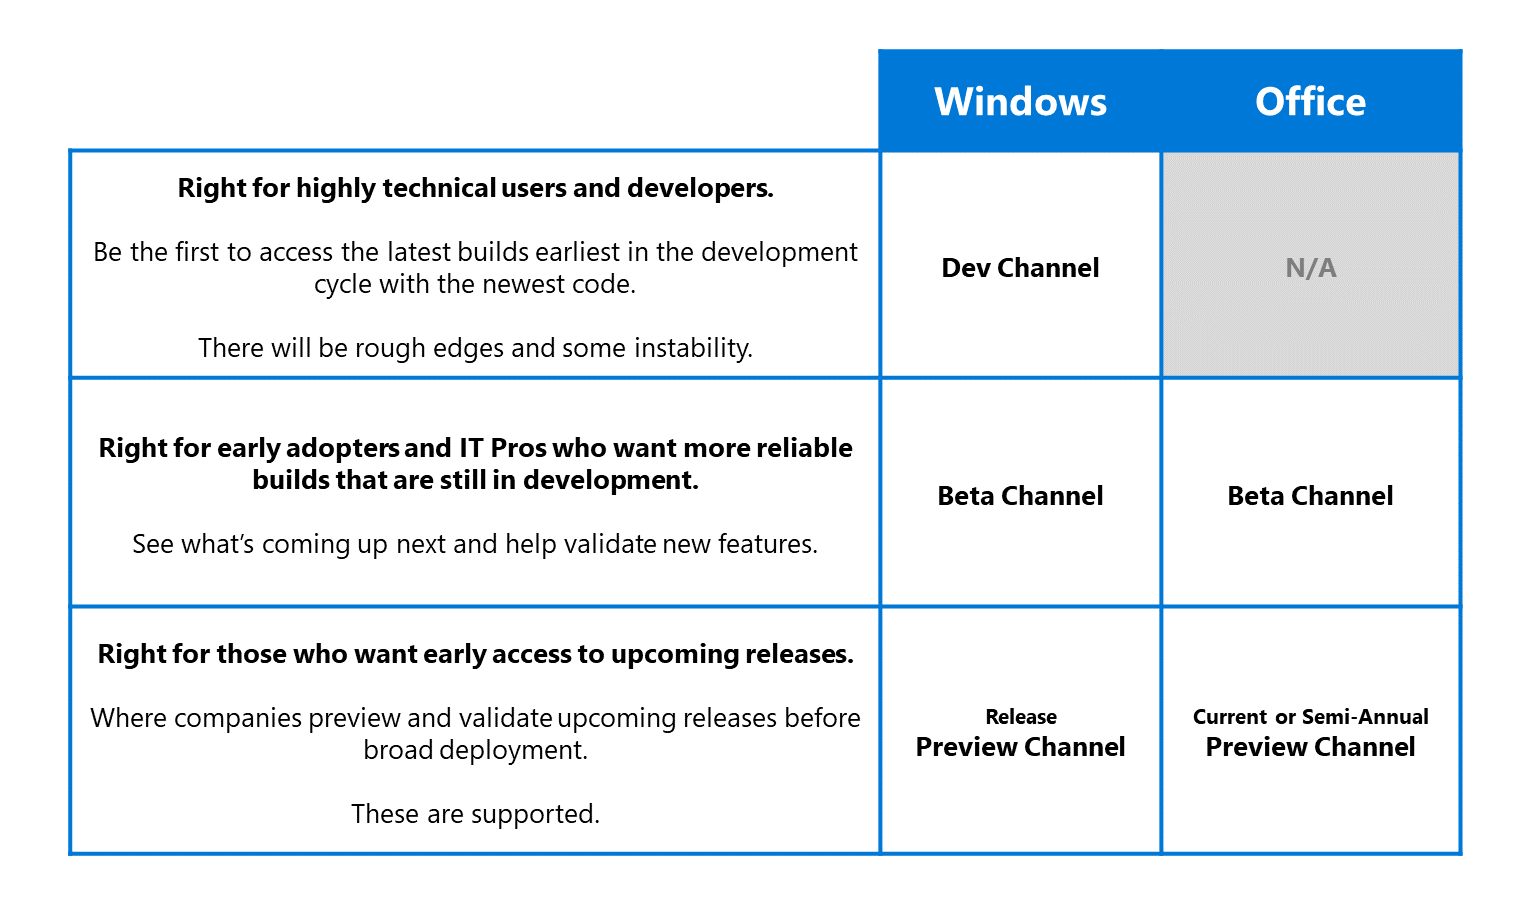 Table showing similarities between channels for Windows and Office Insider Programs. 